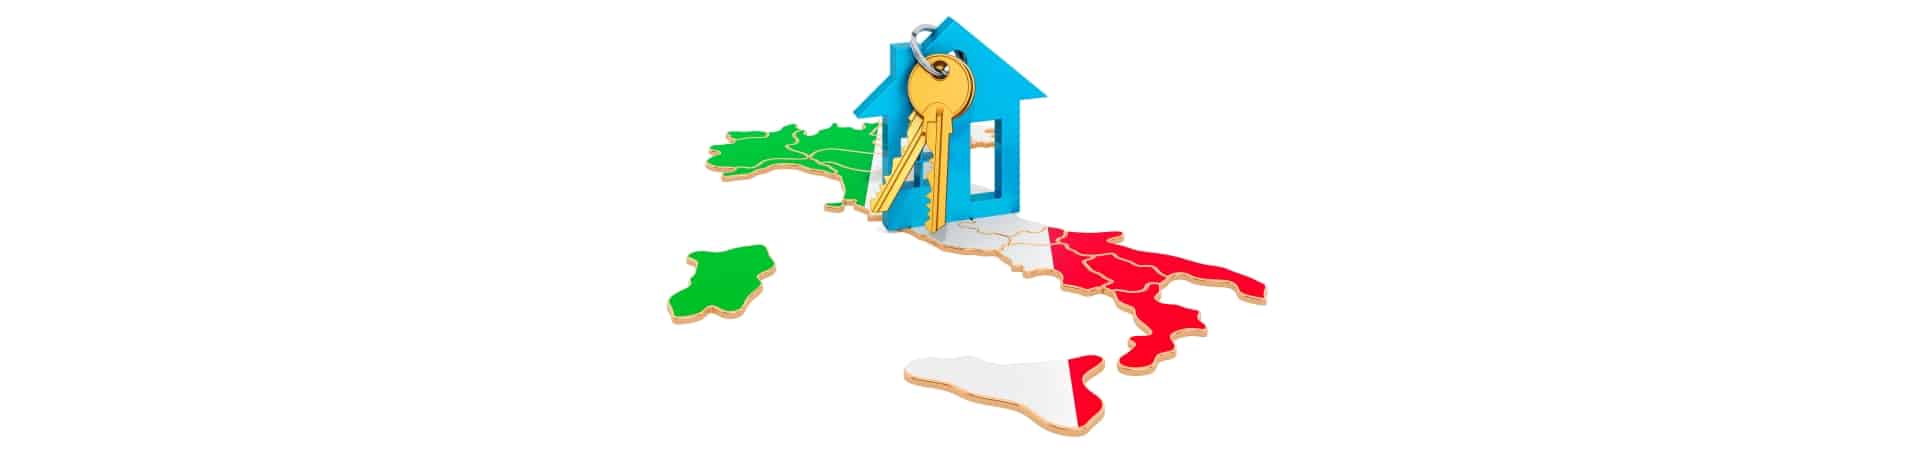 Power of attorney for buying or selling property in Italy